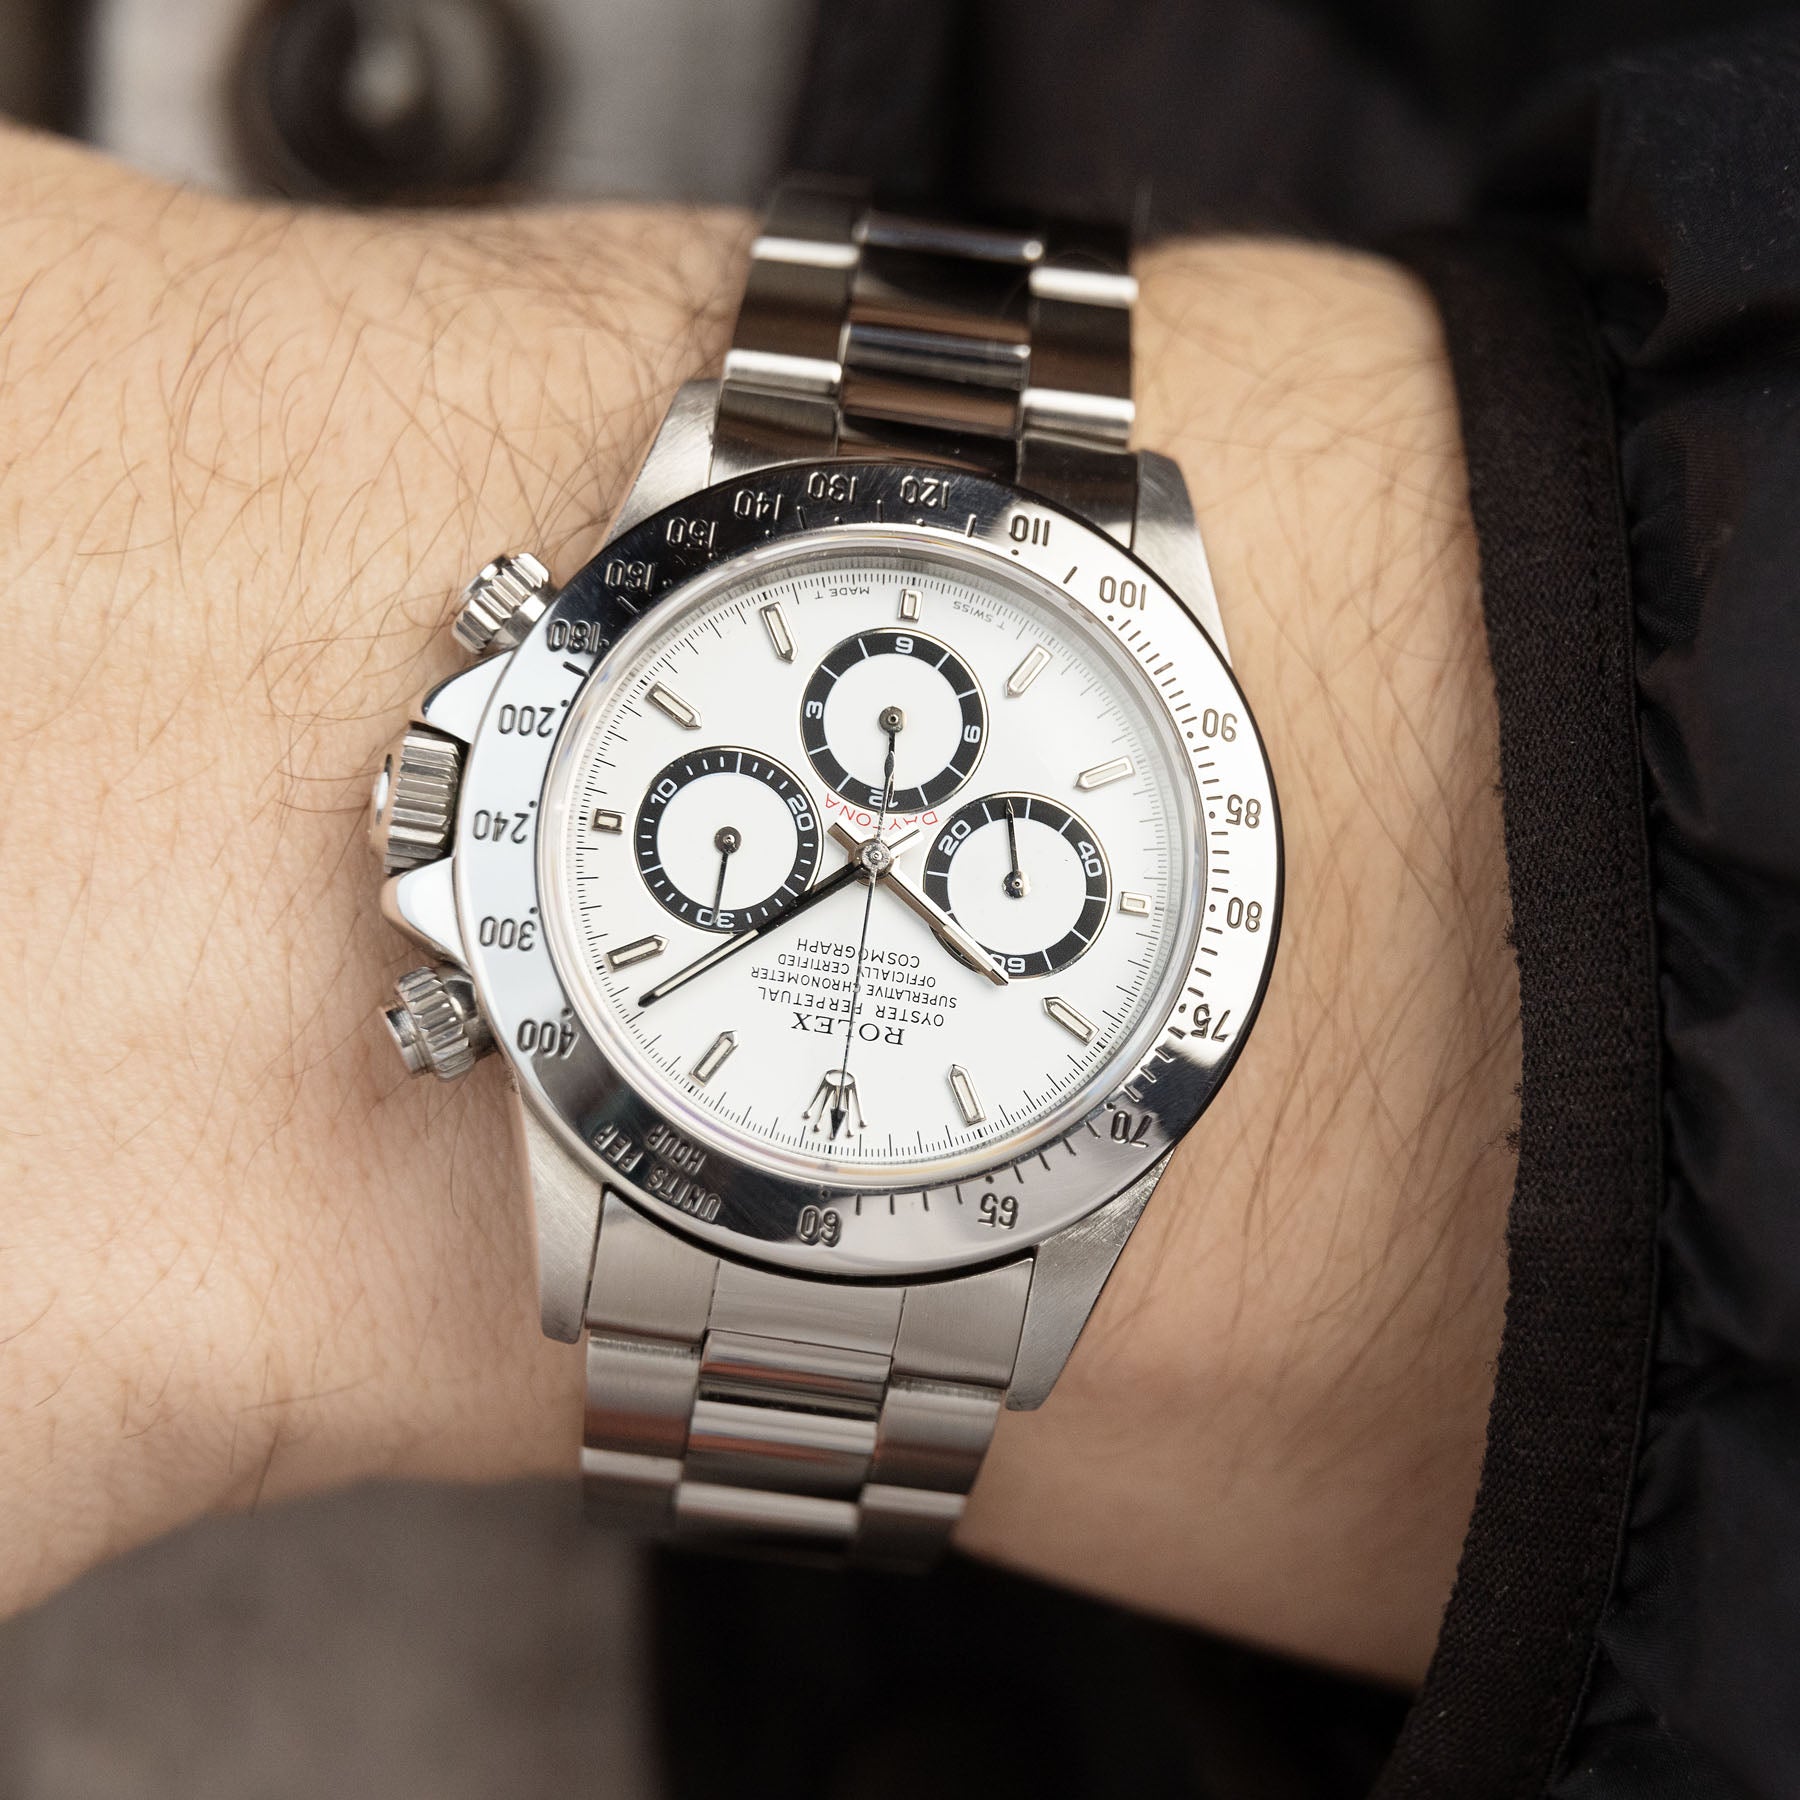 Rolex Daytona Steel 16520 White Dial Box and Papers